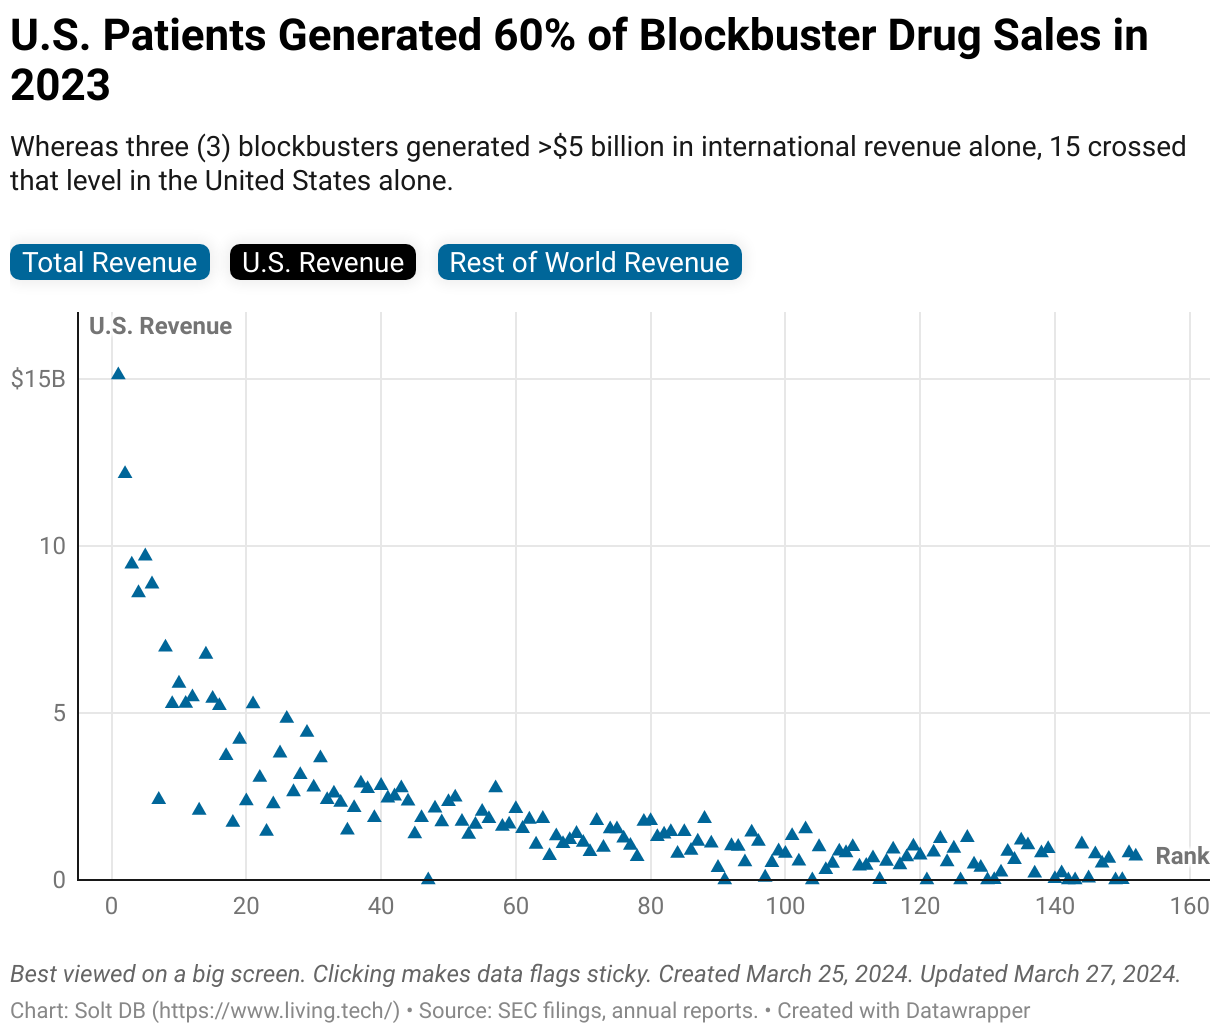 A scatter plot showing the geographic revenue split between the United States and rest of the world for global blockbuster drug products in 2023.